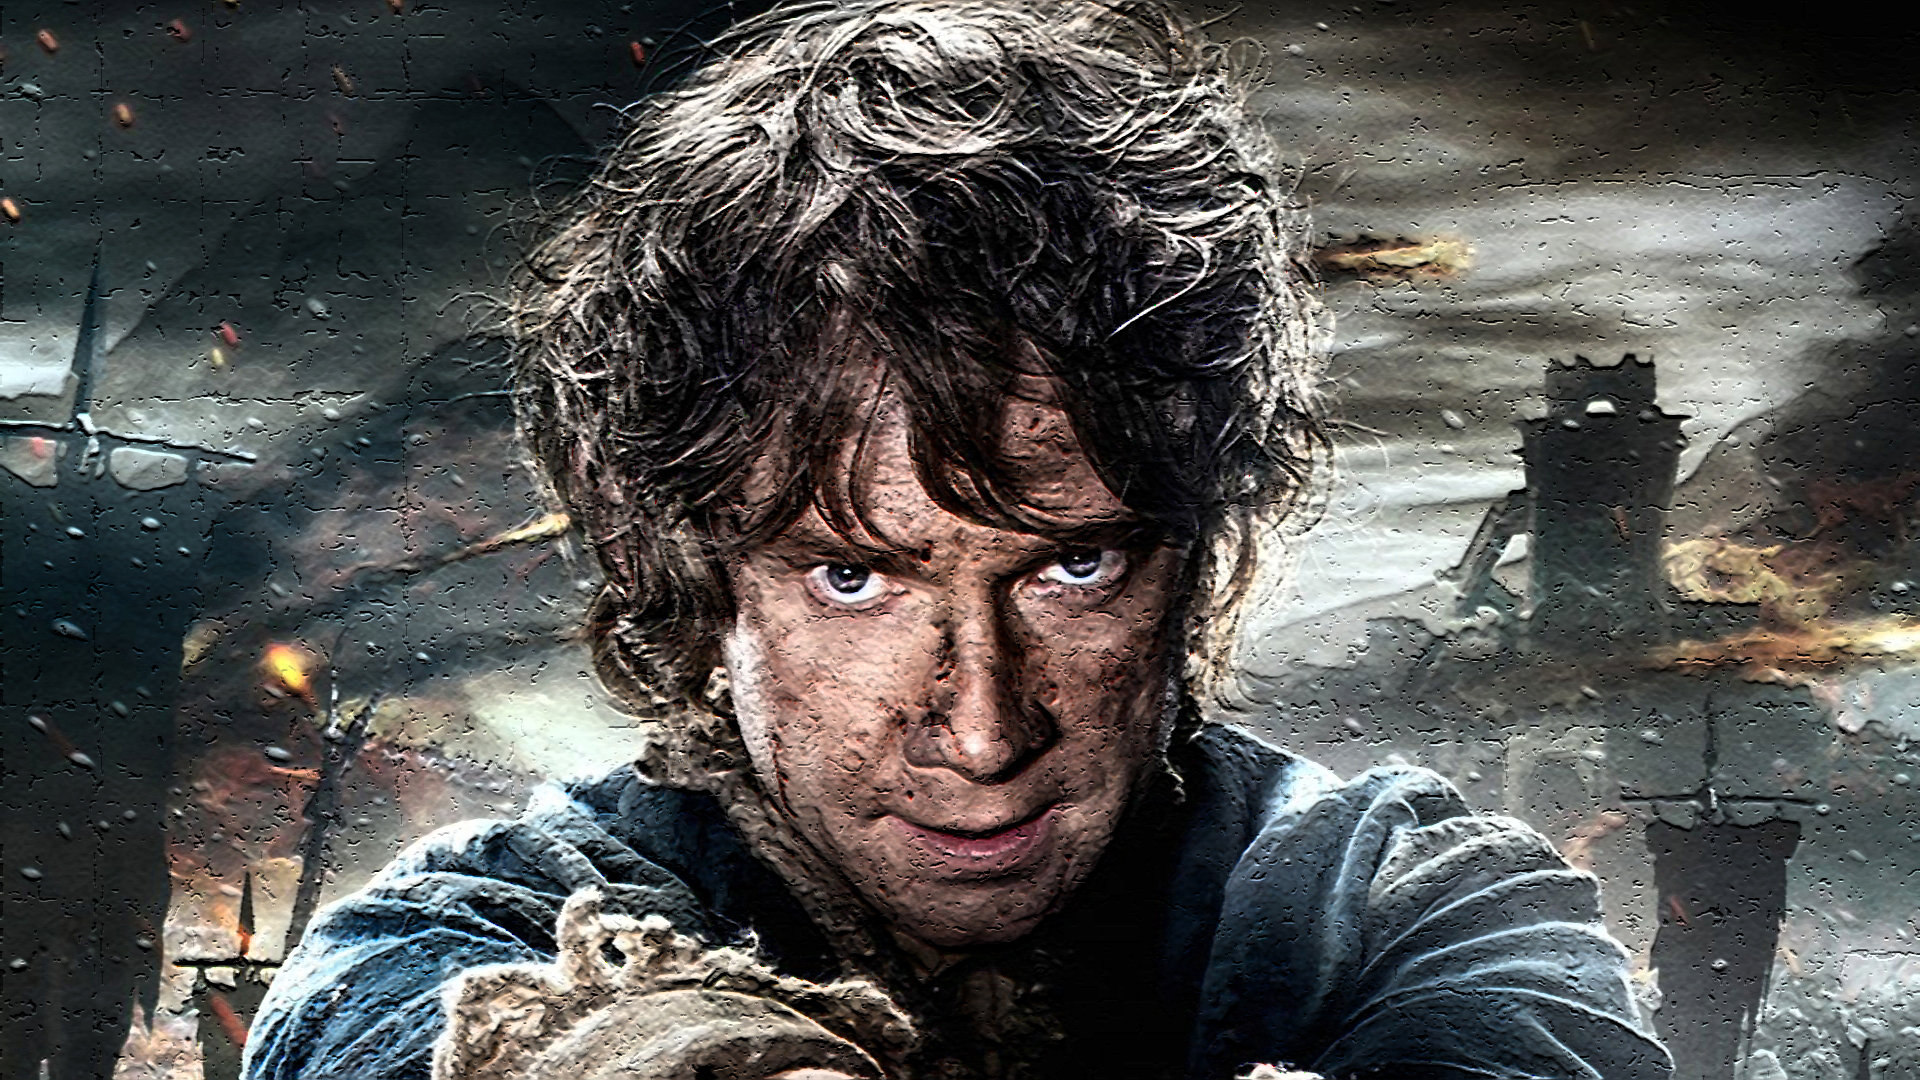 Download full hd 1920x1080 The Hobbit: The Battle Of The Five Armies desktop wallpaper ID:100646 for free